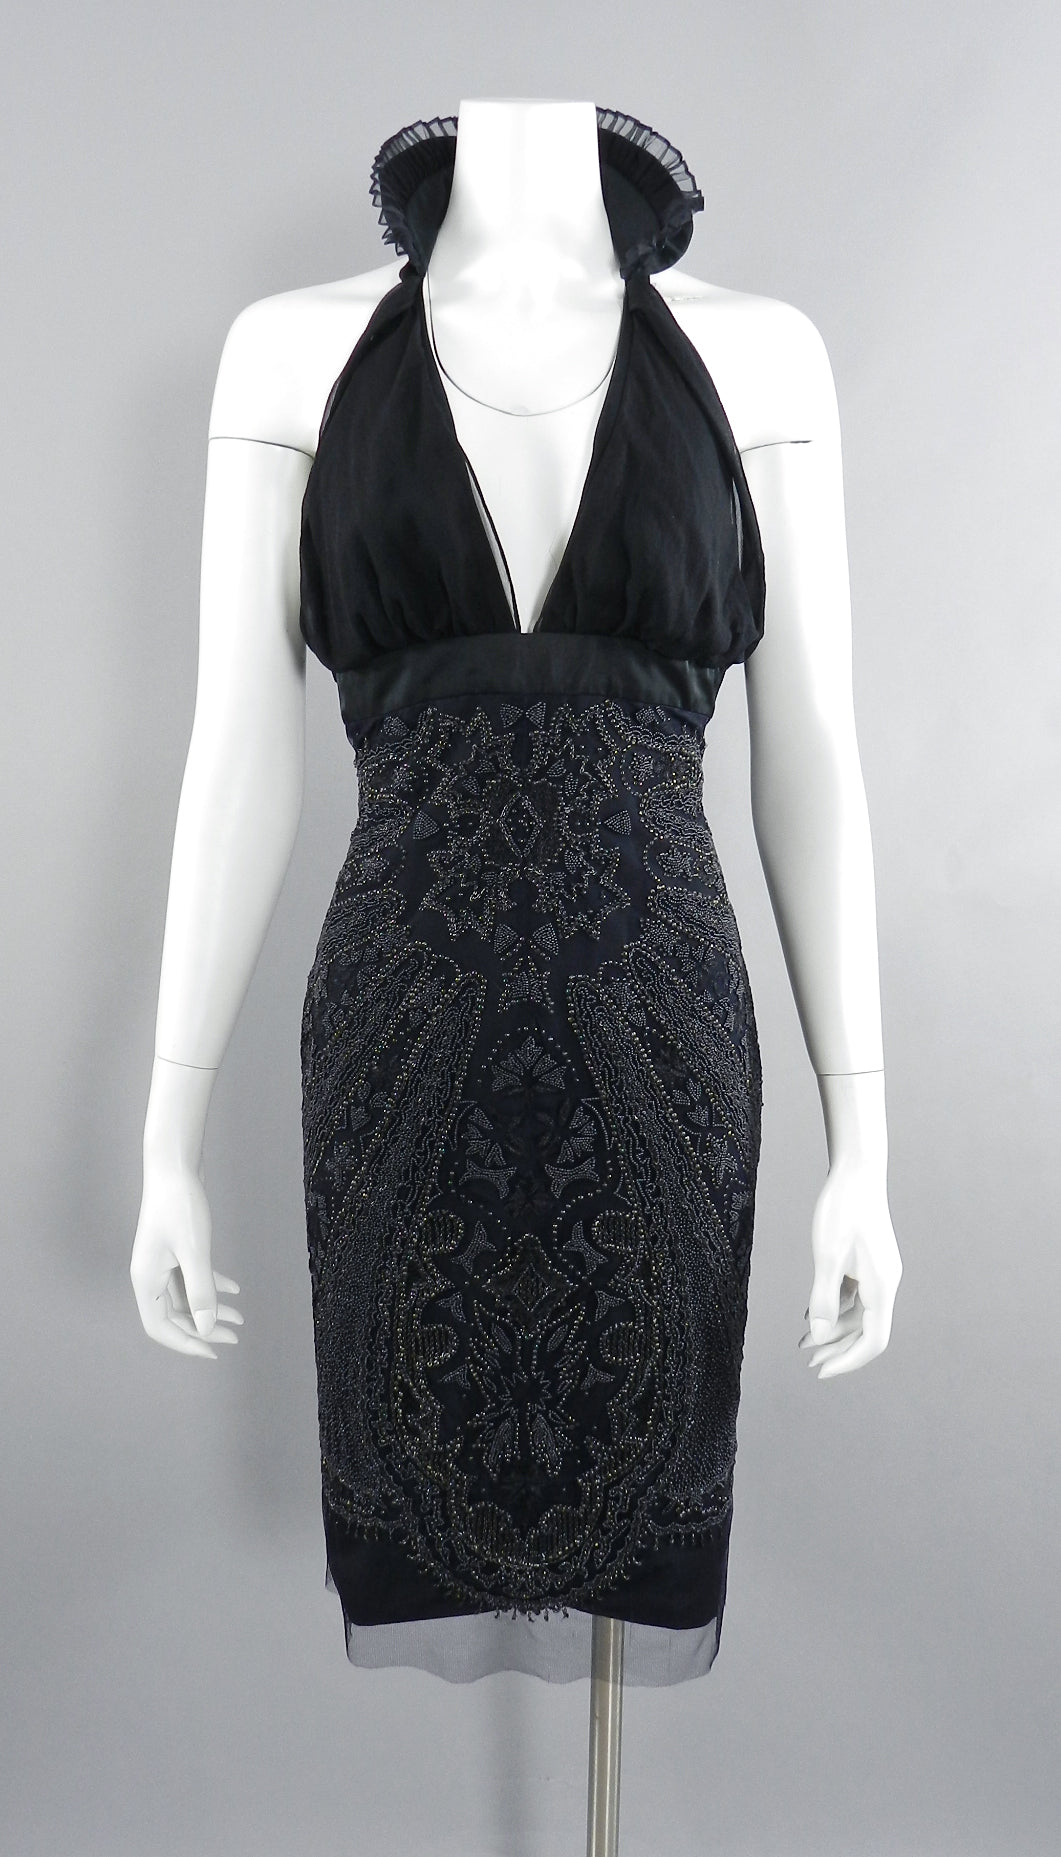 Gucci by Tom Ford runway Beaded Dress, A/W 2005